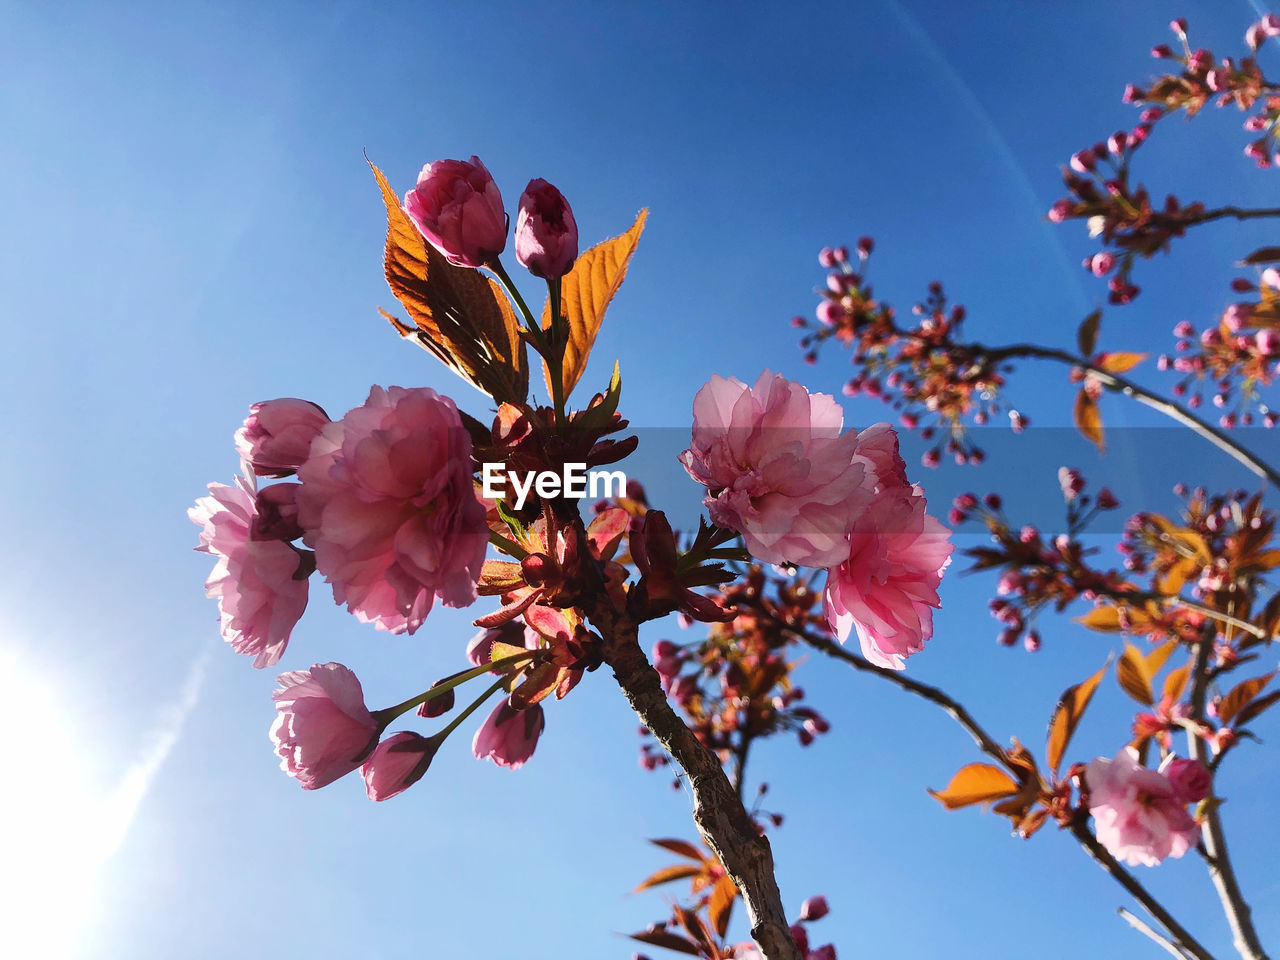 LOW ANGLE VIEW OF PINK CHERRY BLOSSOM AGAINST SKY